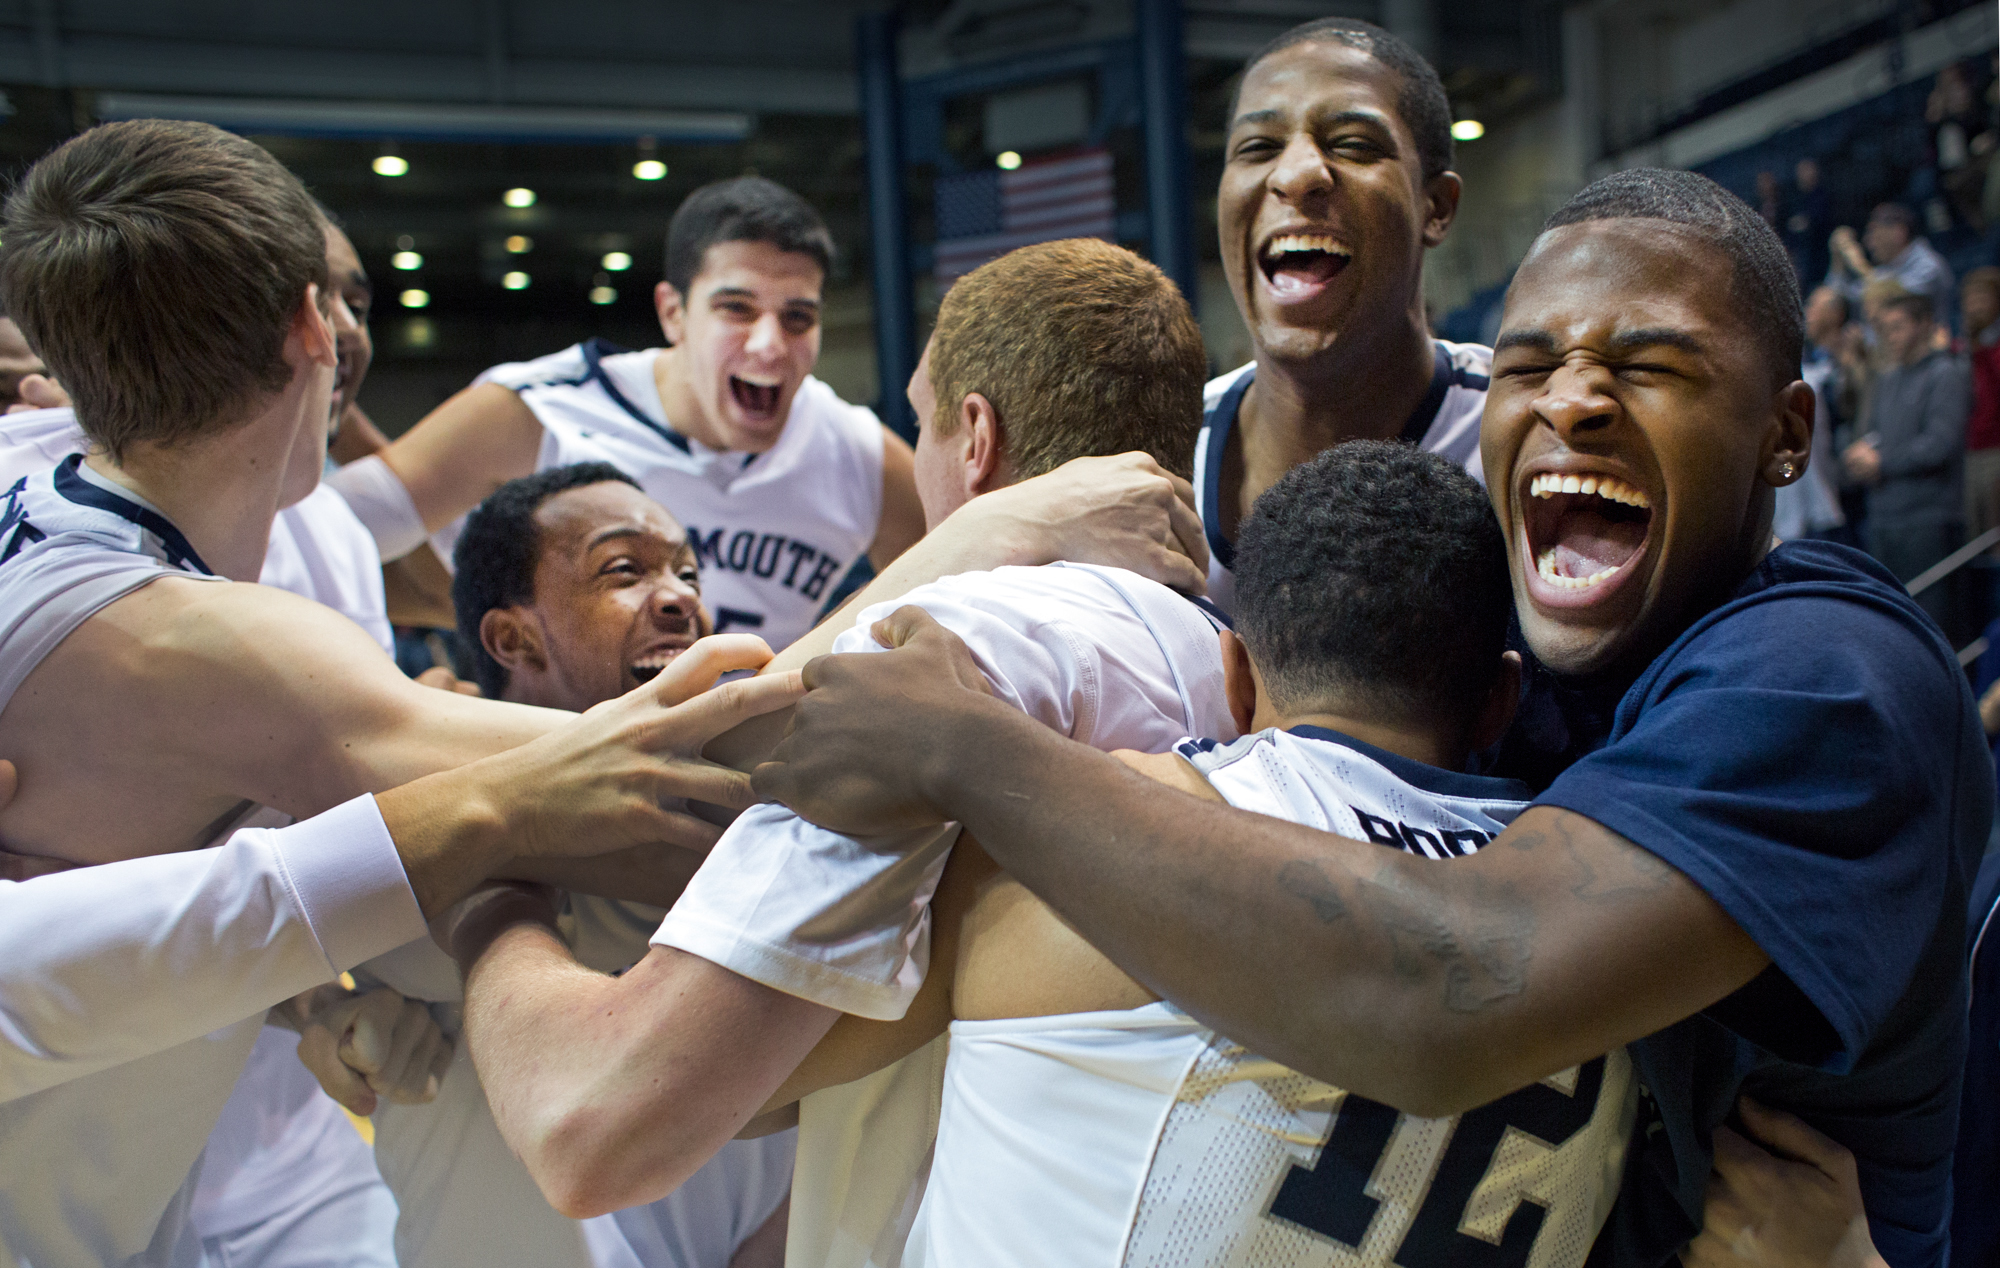 Monmouth University men's basketball celebrates after upsetting Canisus College 83-82 during a regular season game on January 19, 2014 at the Monmouth Activities Center in Long Branch, New Jersey. Photo by Tom Brenner